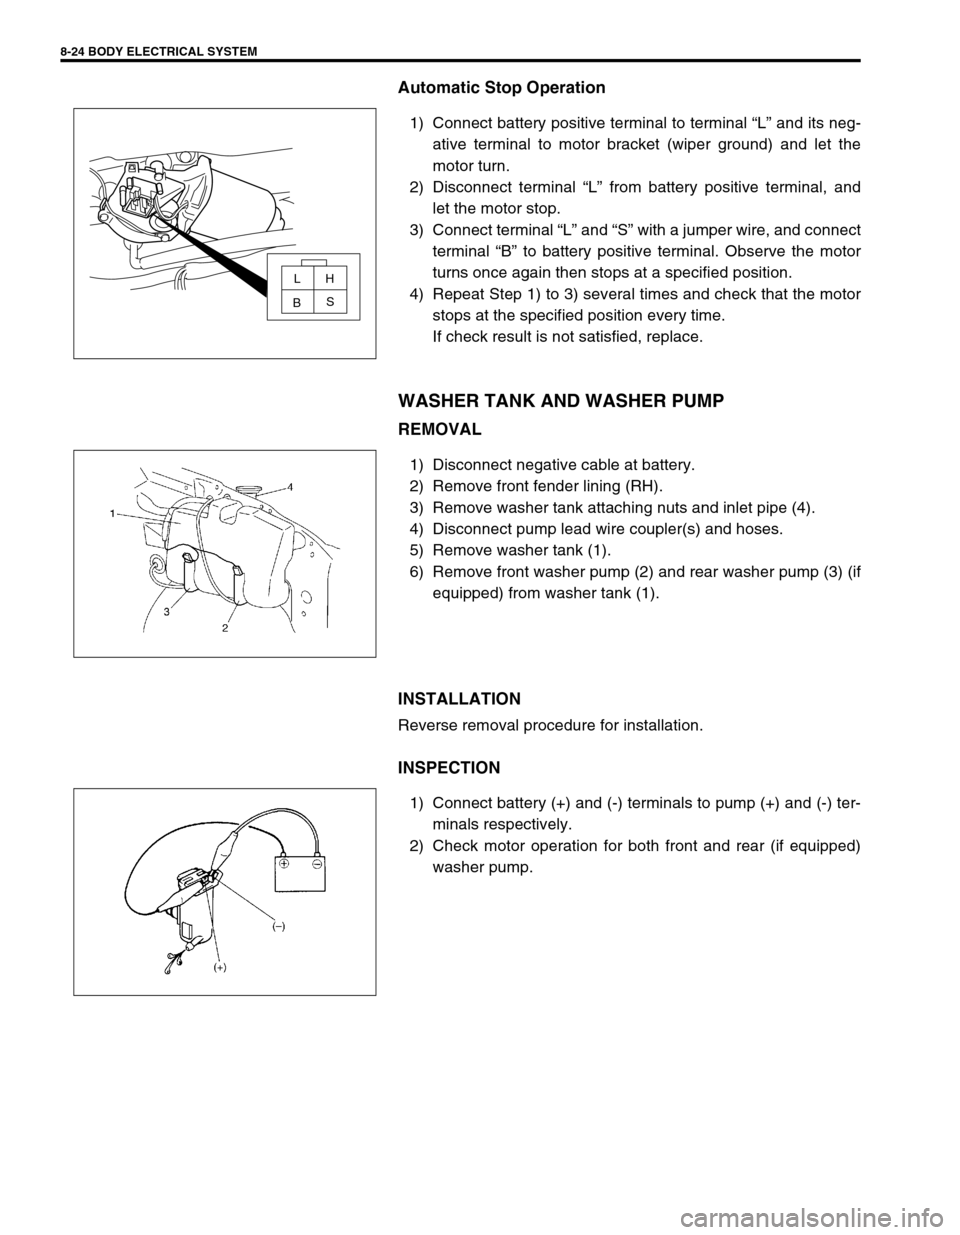 SUZUKI SWIFT 2000 1.G Transmission Service Workshop Manual 8-24 BODY ELECTRICAL SYSTEM
Automatic Stop Operation
1) Connect battery positive terminal to terminal “L” and its neg-
ative terminal to motor bracket (wiper ground) and let the
motor turn.
2) Dis